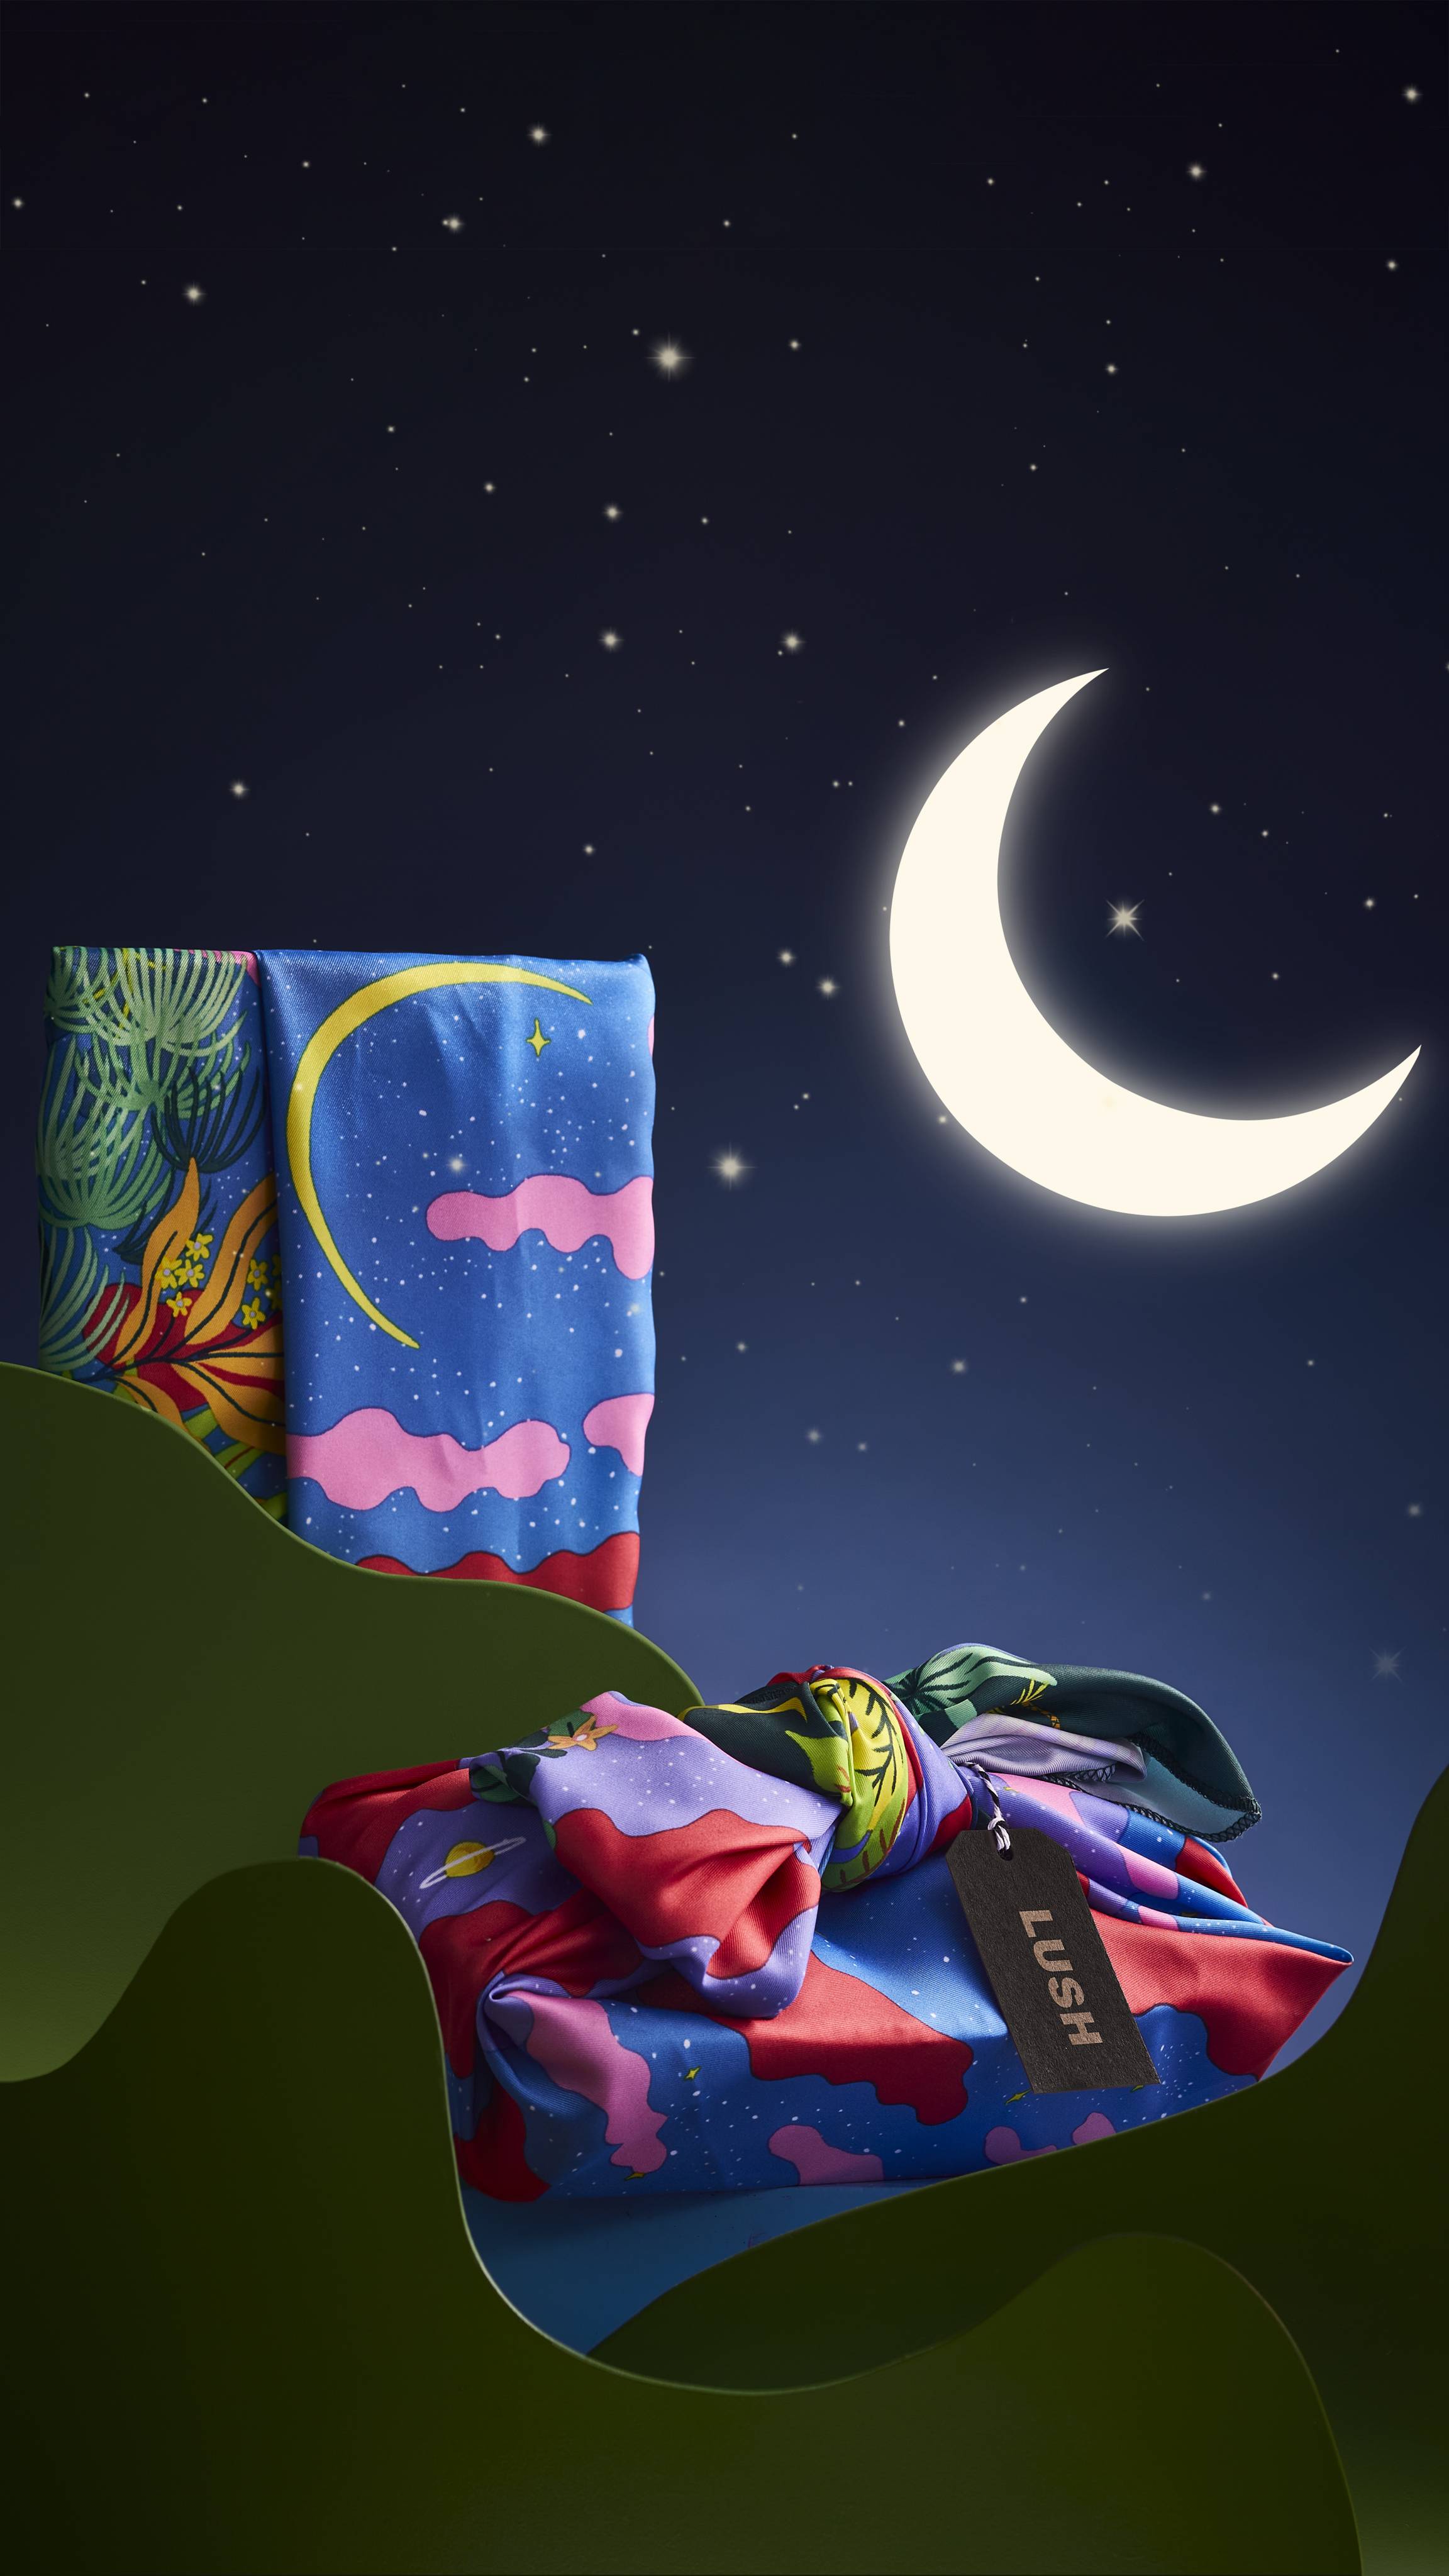 The Candy Sky knot wrap is shown two ways; folded and draped, and wrapped around a gift box. Both wraps are on a wavy green stand on a starry background with a crescent moon.